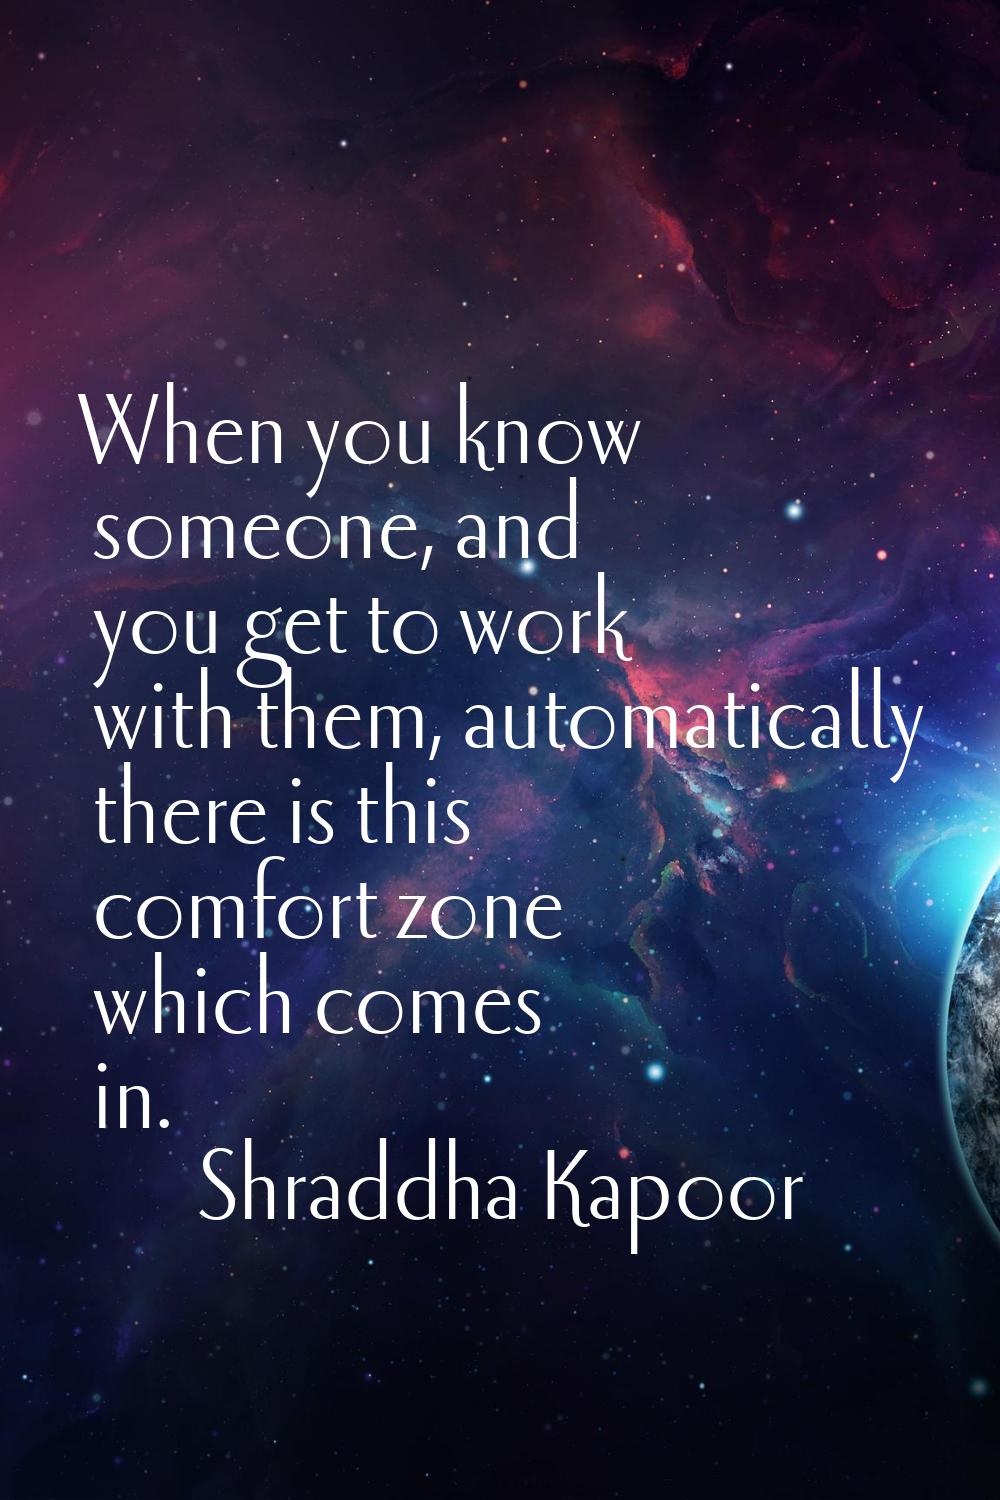 When you know someone, and you get to work with them, automatically there is this comfort zone whic